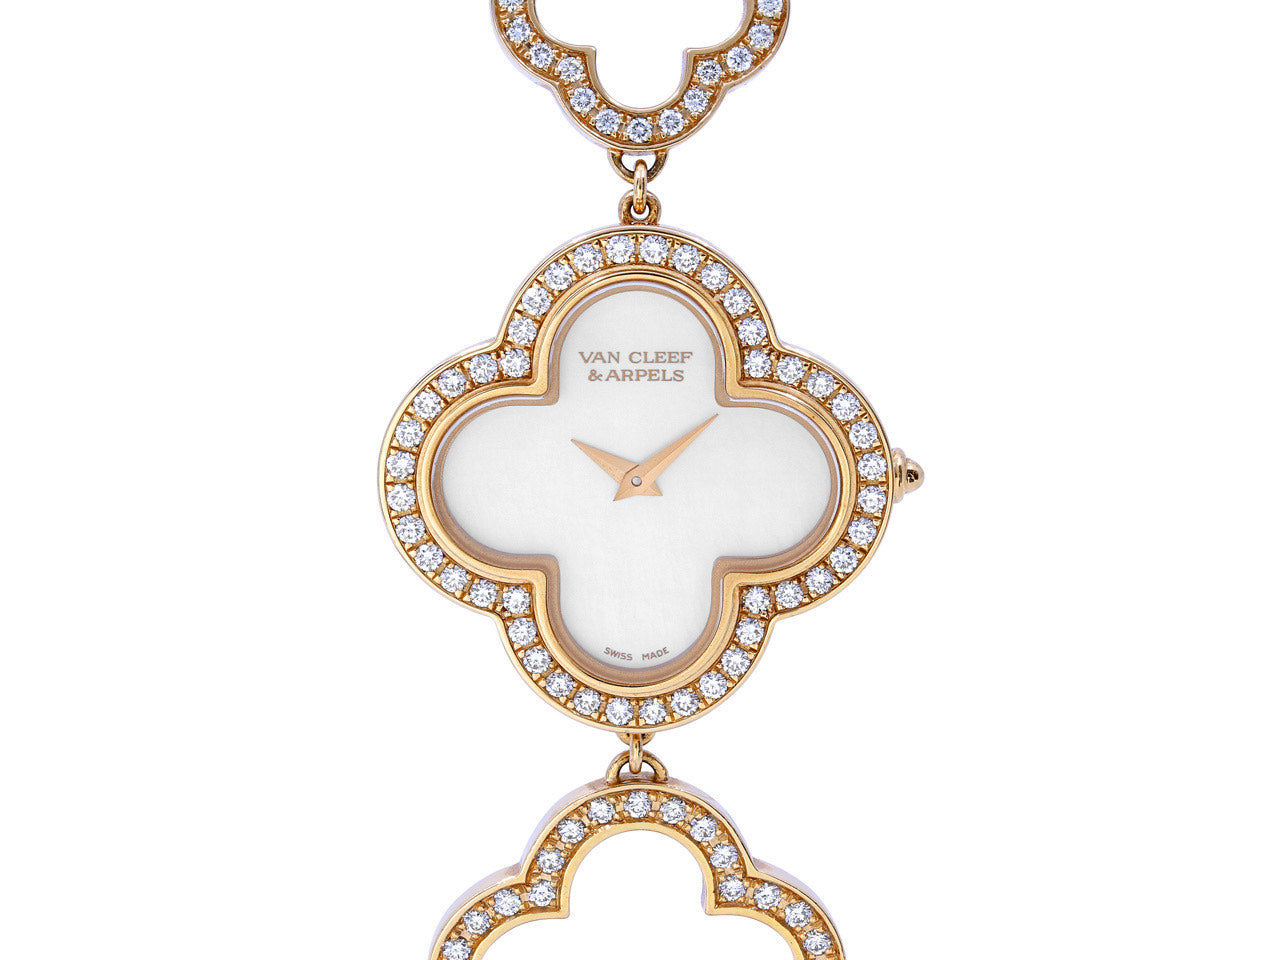 The Alhambra Collection by Van Cleef & Arpels